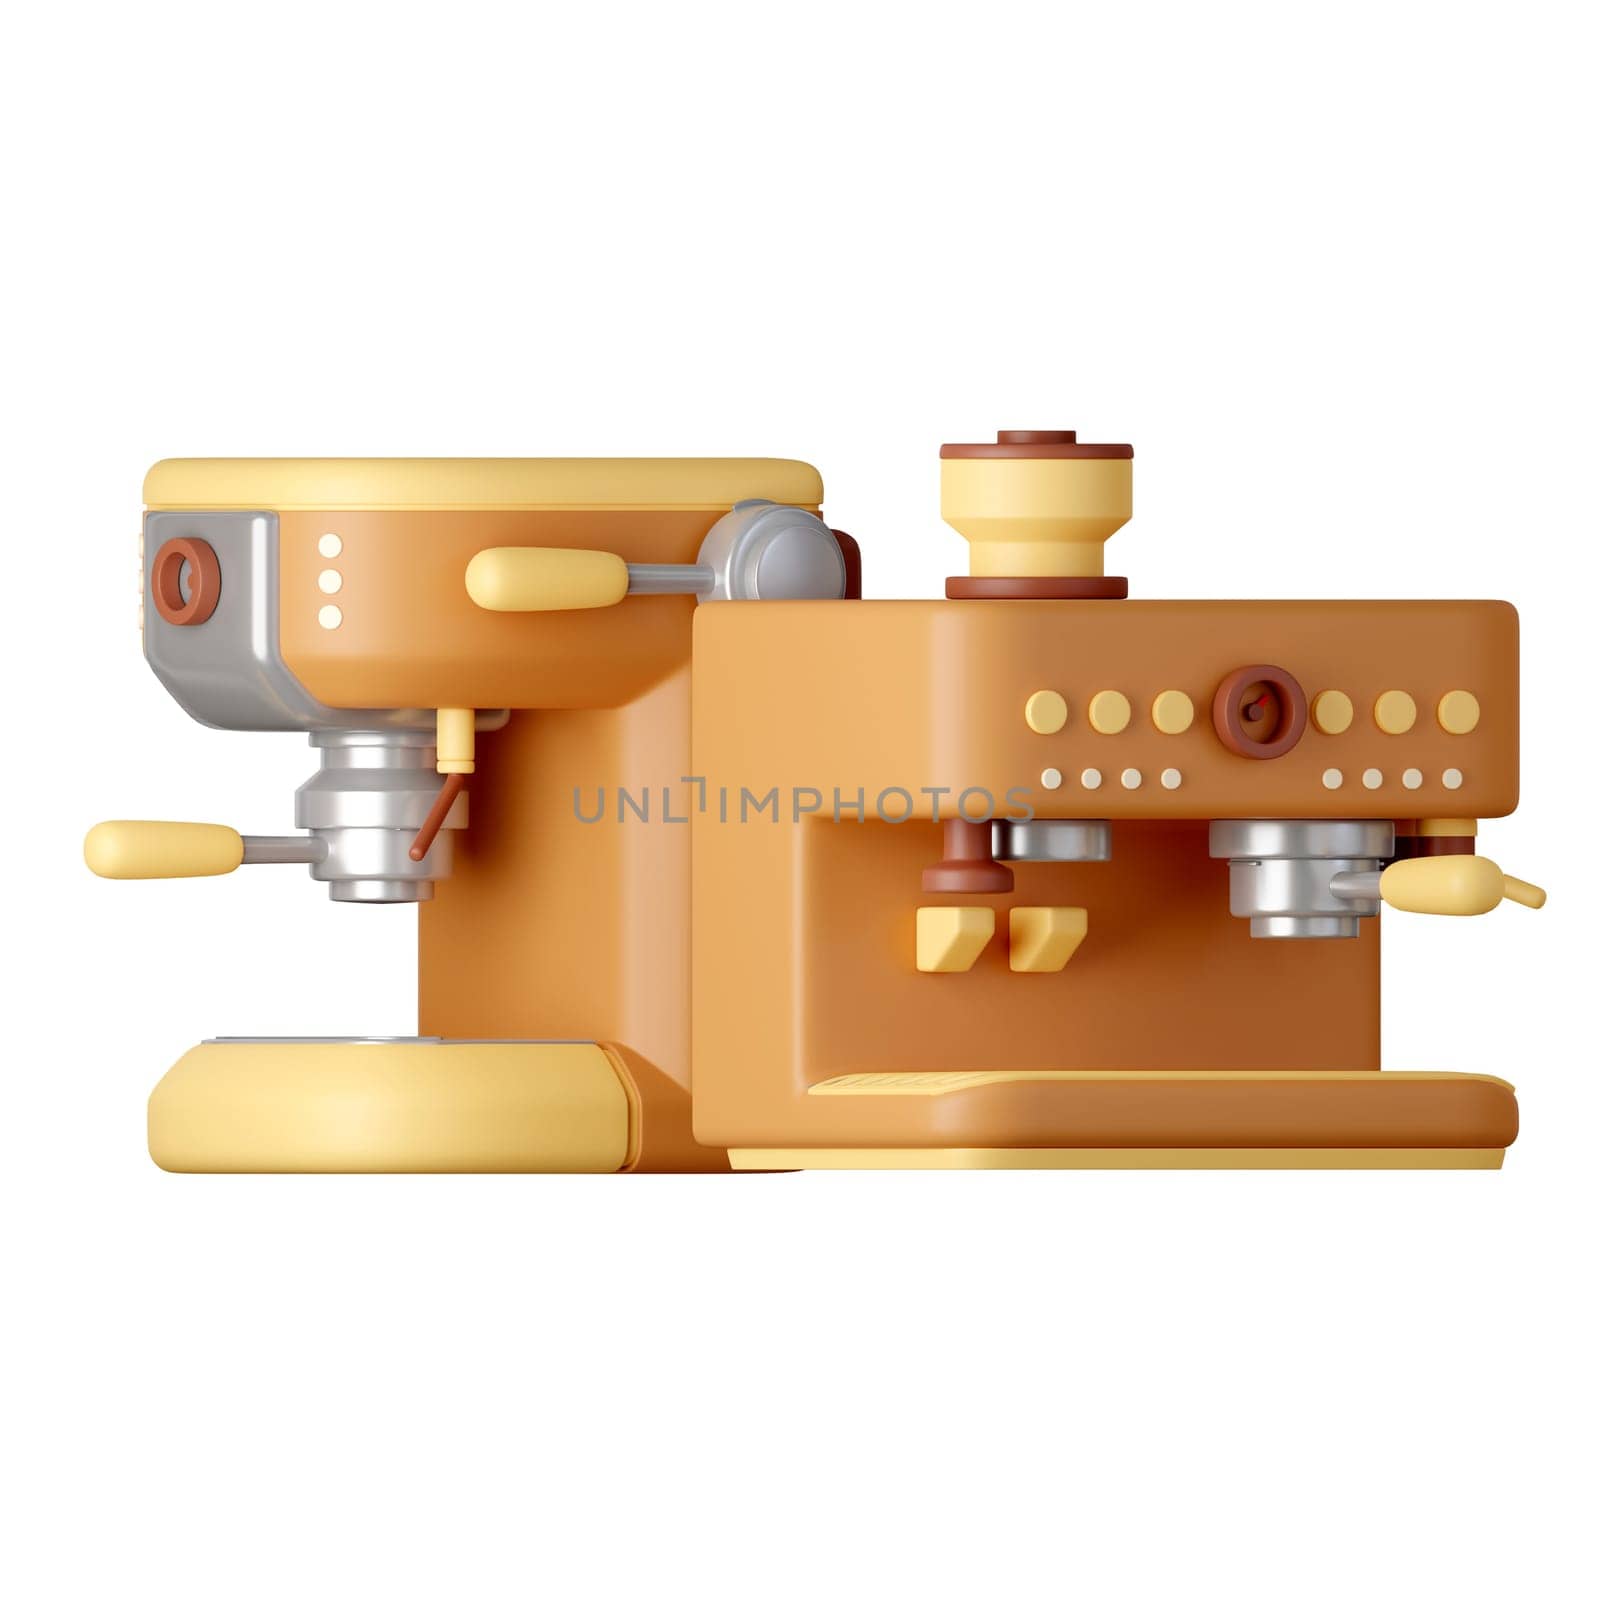 Coffee Machine Cartoon Style Isolated on a White Background. 3d illustration by meepiangraphic